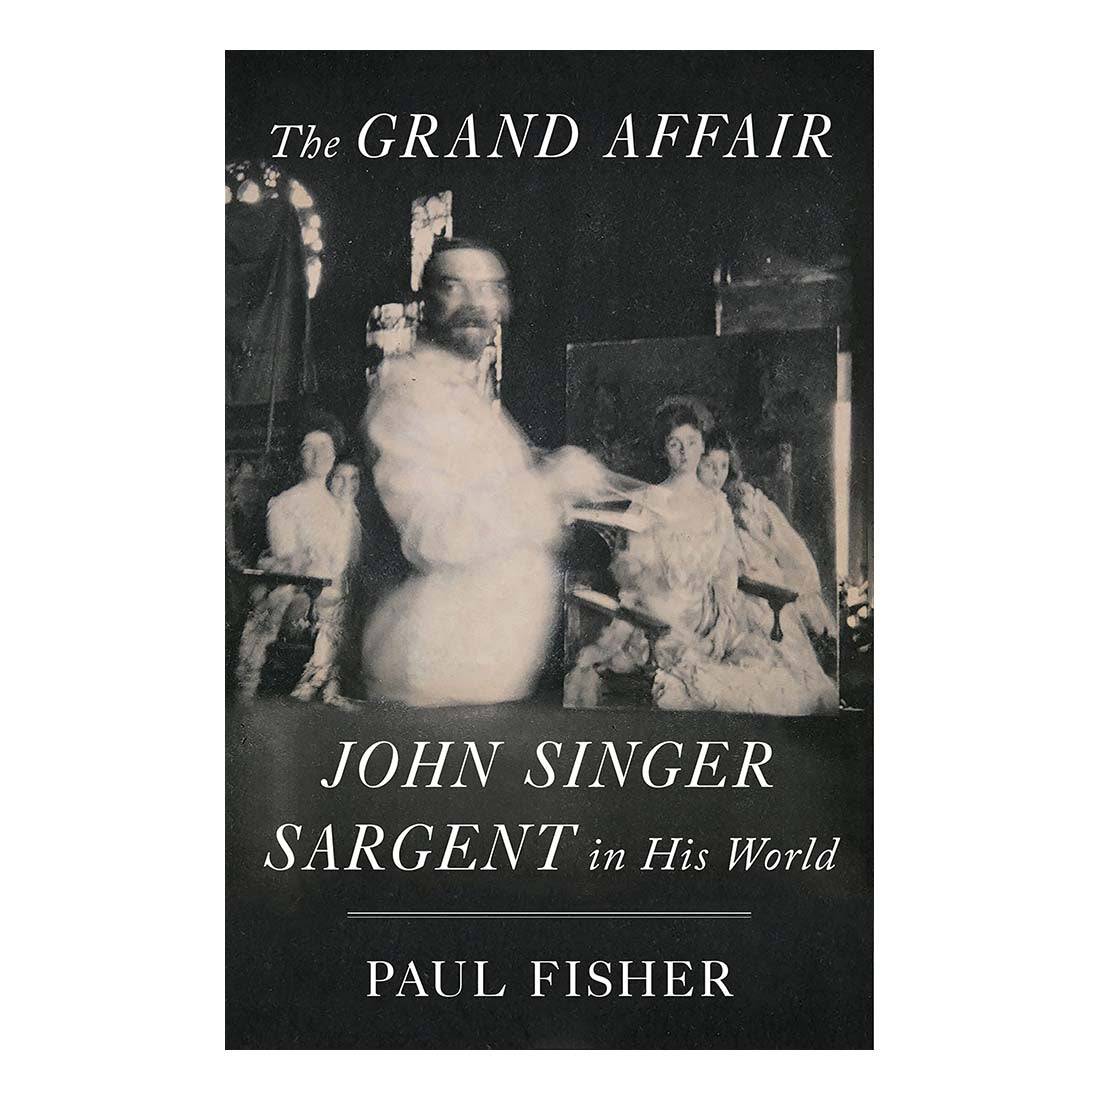 The Grand Affair: John Singer Sargent and His World